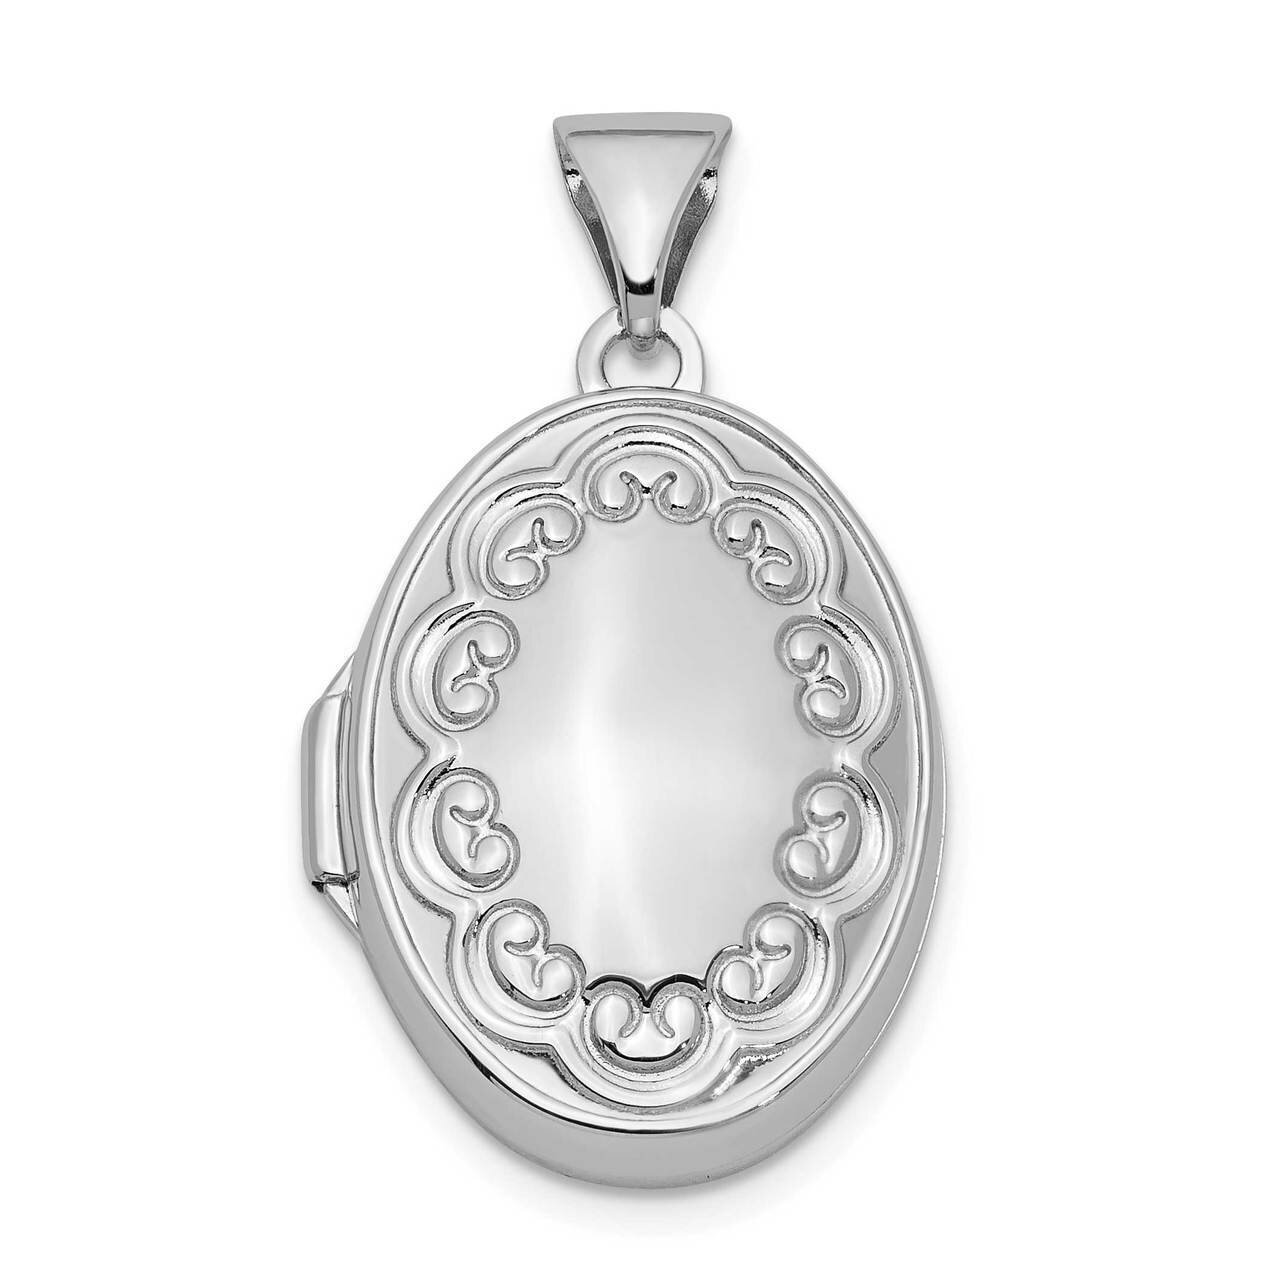 17mm Scrolled Oval Locket Sterling Silver Rhodium-plated QLS968